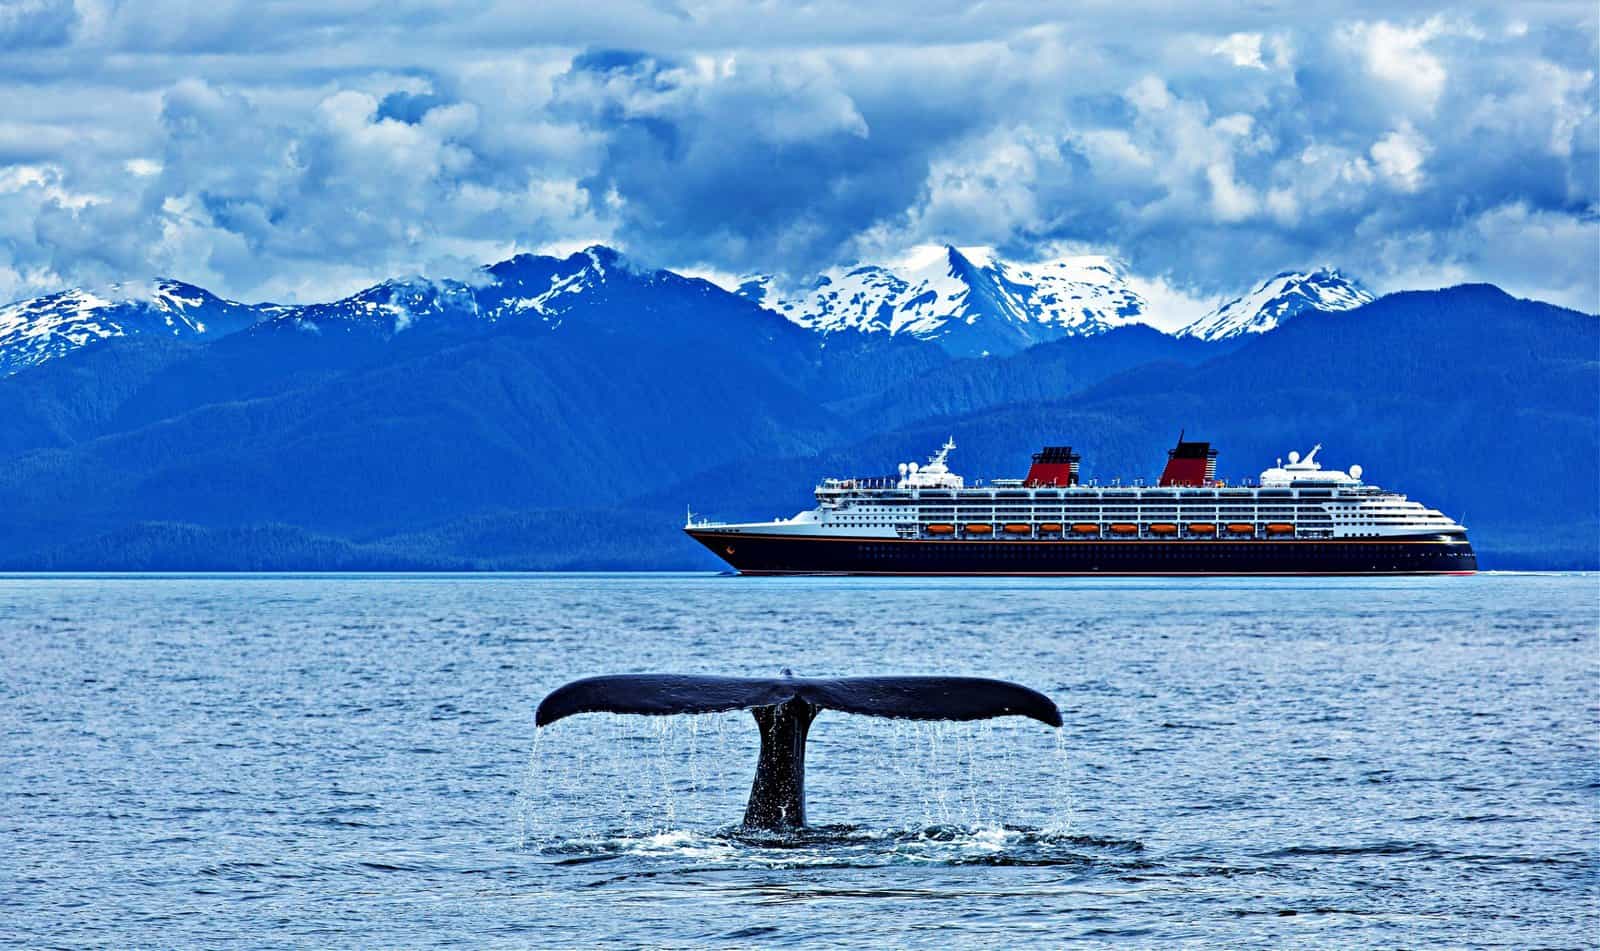 The whale shows the tail on cruise liner and snow mountains background, Alaska, the USA